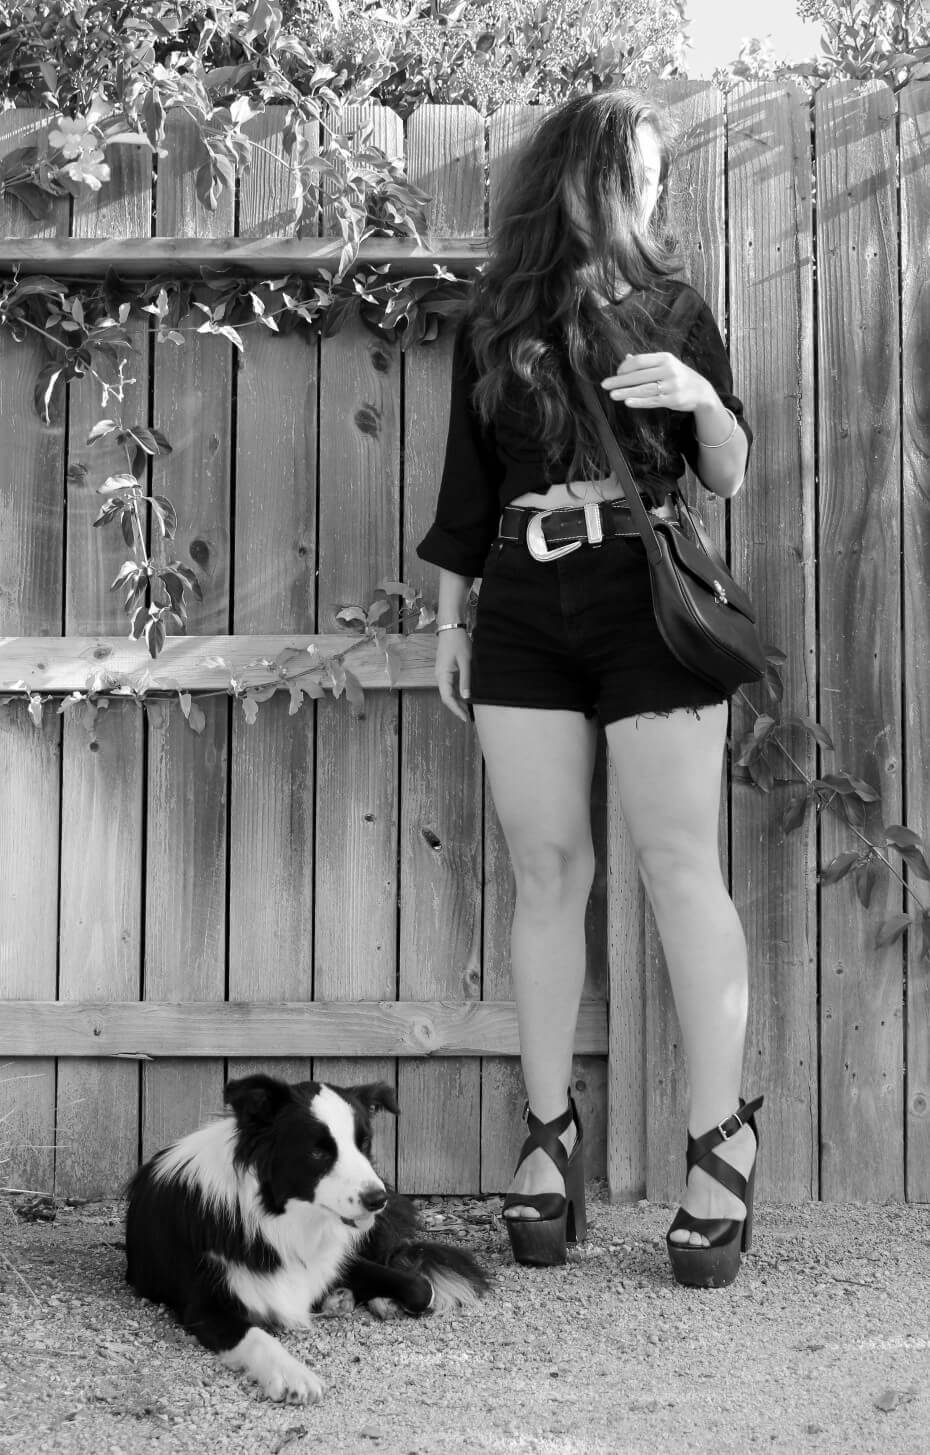 All black summer vintage outfit featuring Nina Ricci and a border collie